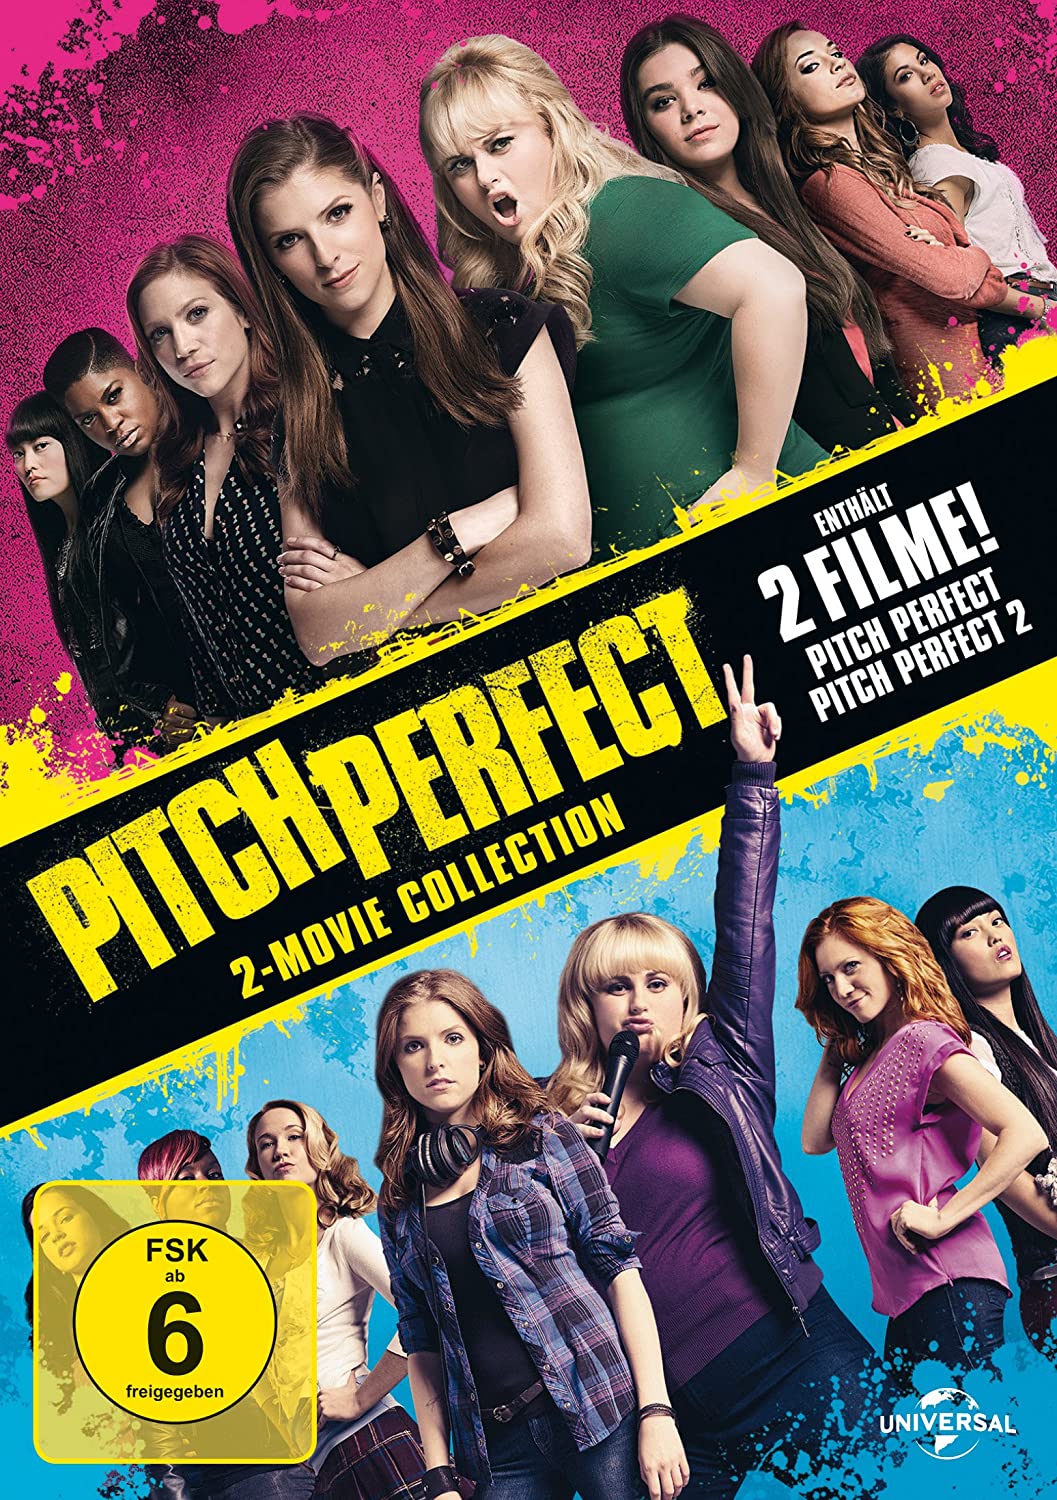 Pitch Perfect 1 + 2 Set 2-Movie Collection